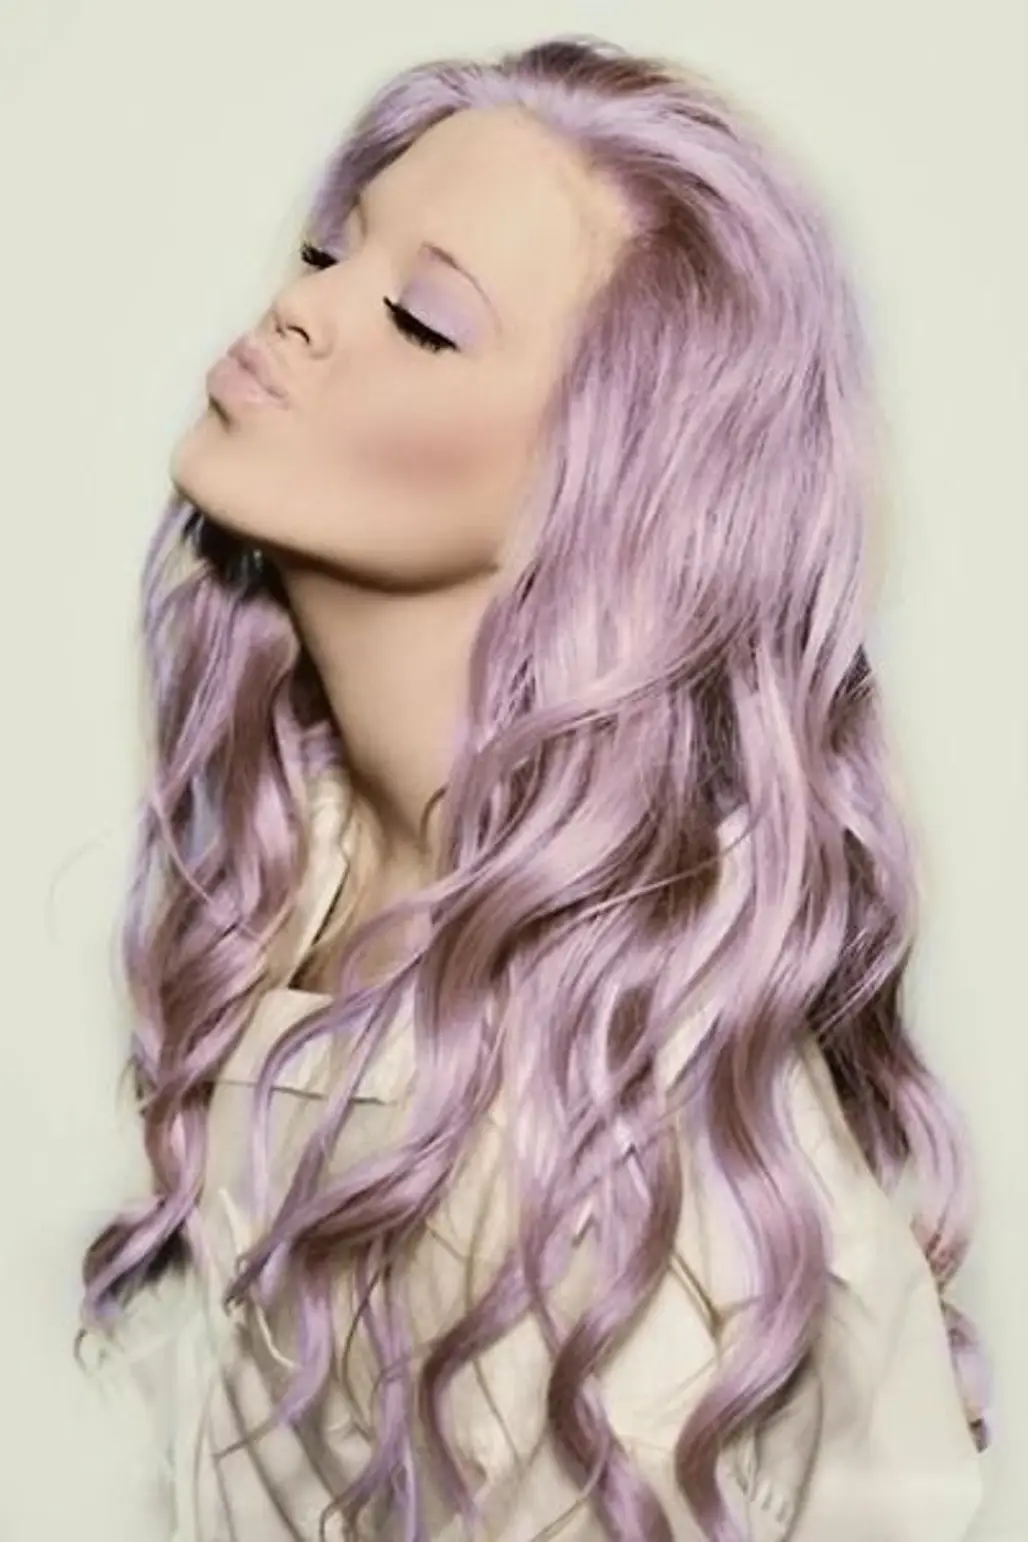 hair,pink,clothing,face,purple,